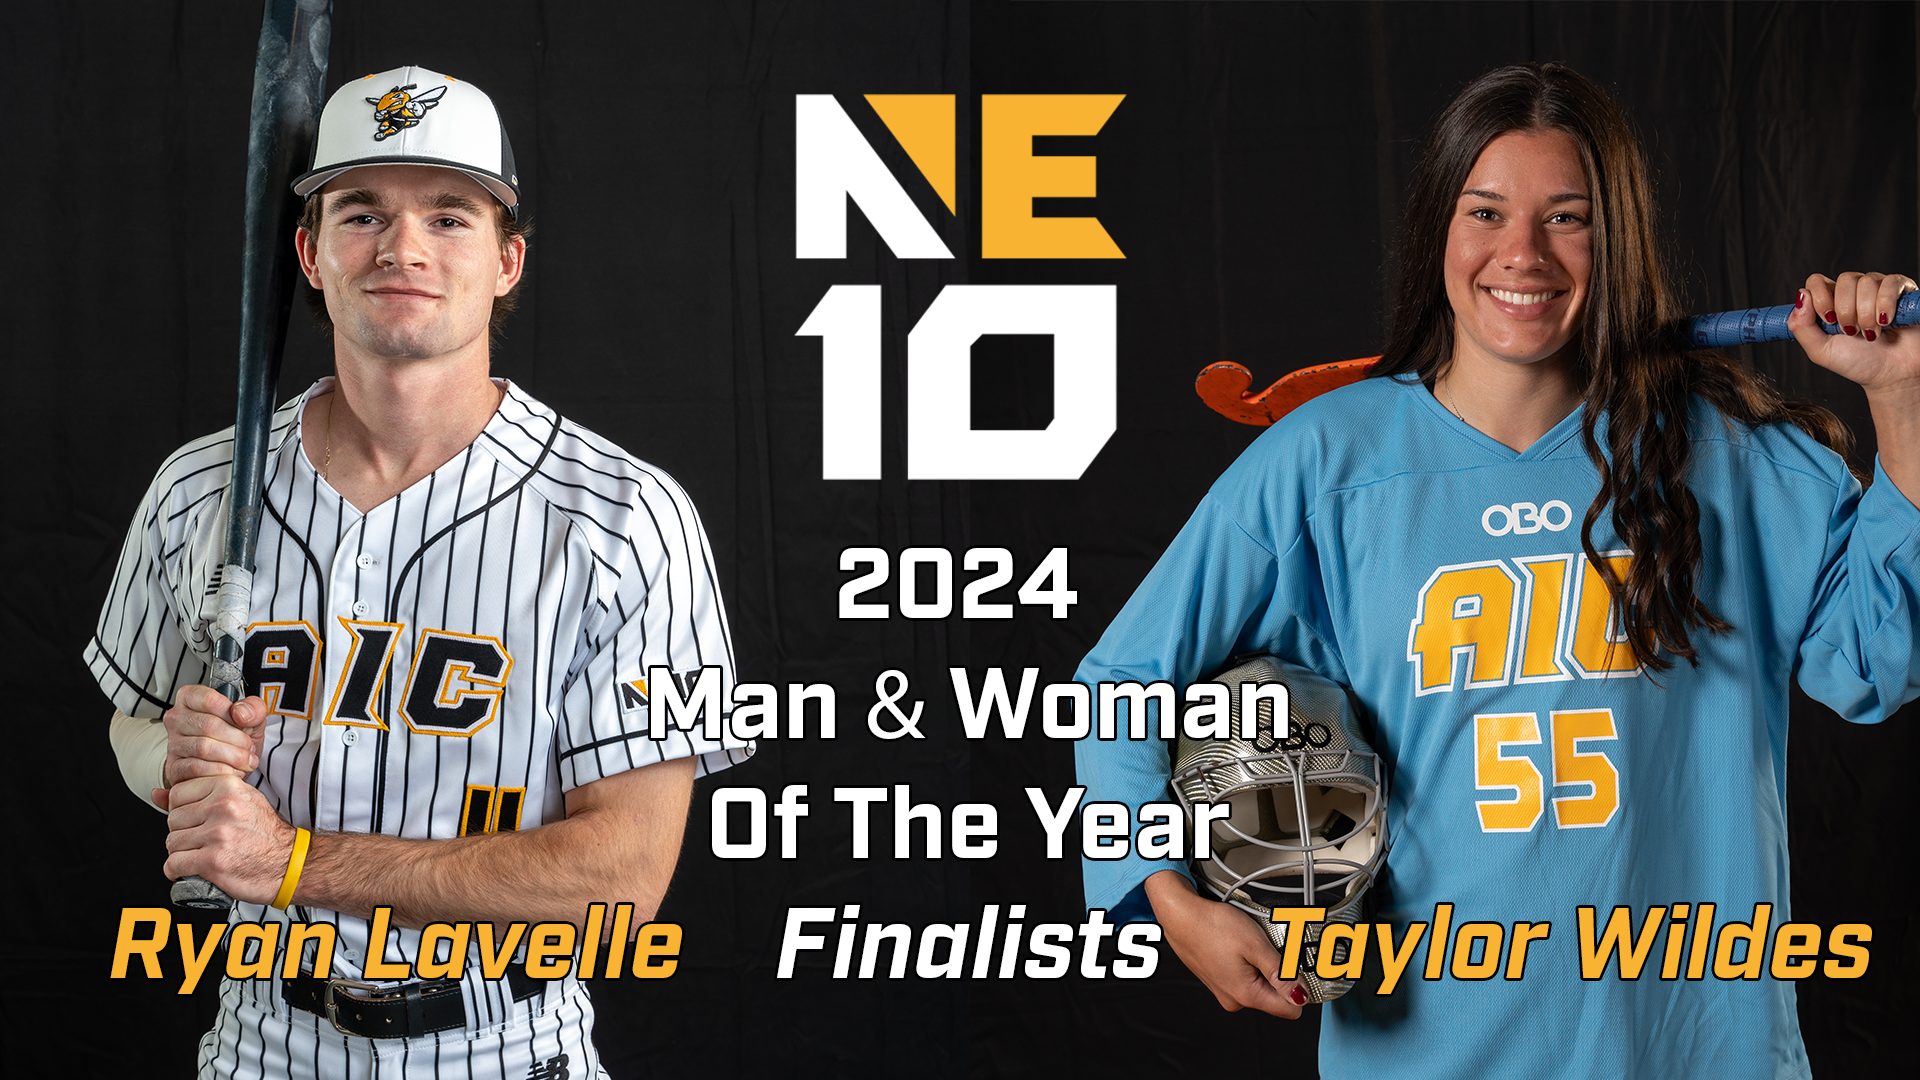 Lavelle, Wildes named finalists for NE10 Man & Woman of the Year Awards